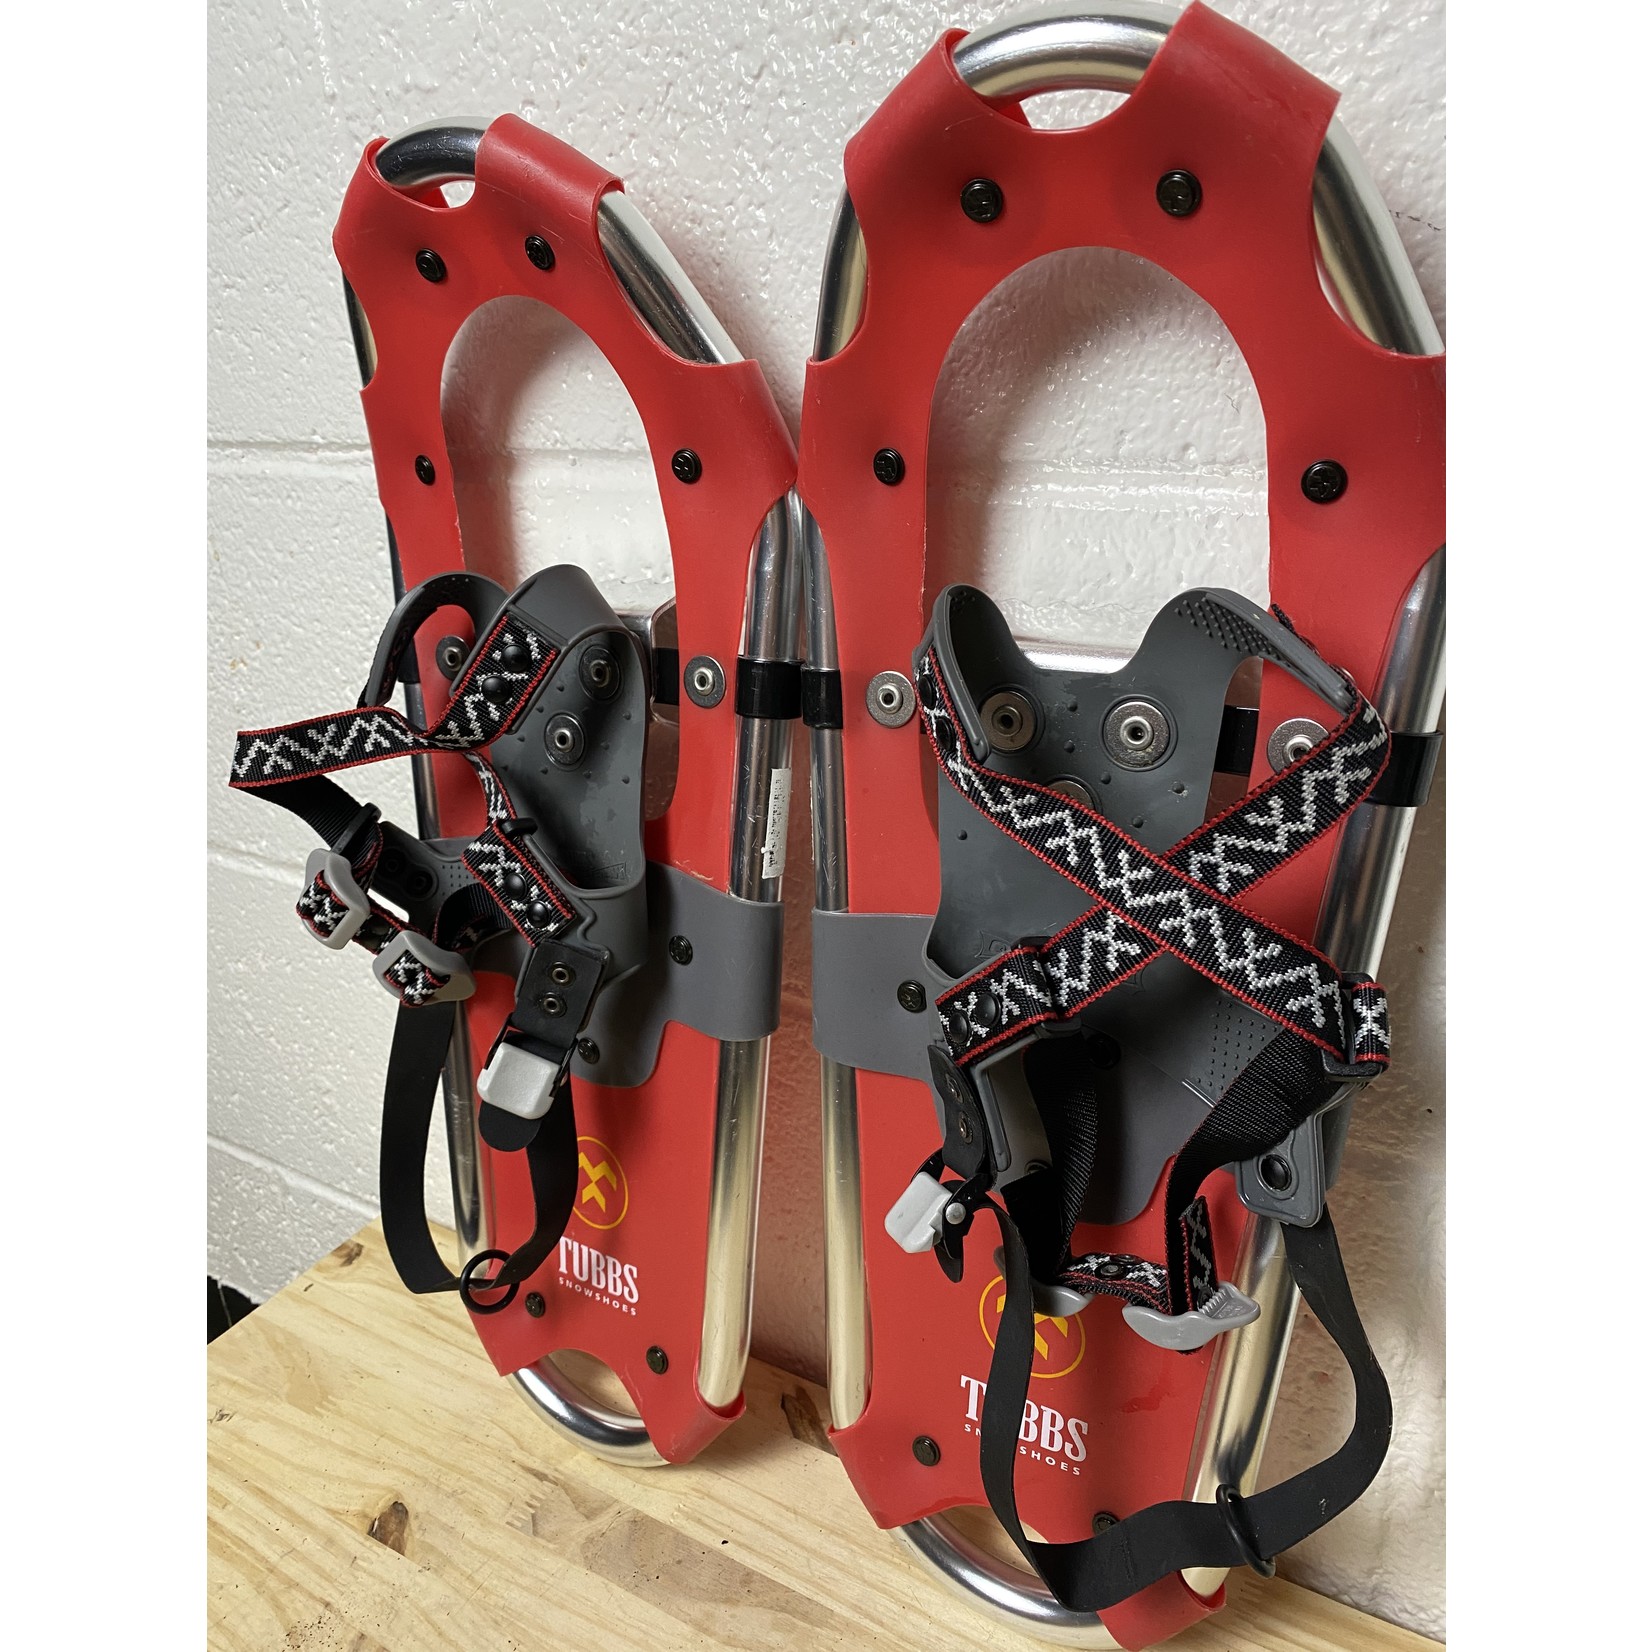 Tubbs Tubbs Snowshoes - Red - 19 inch